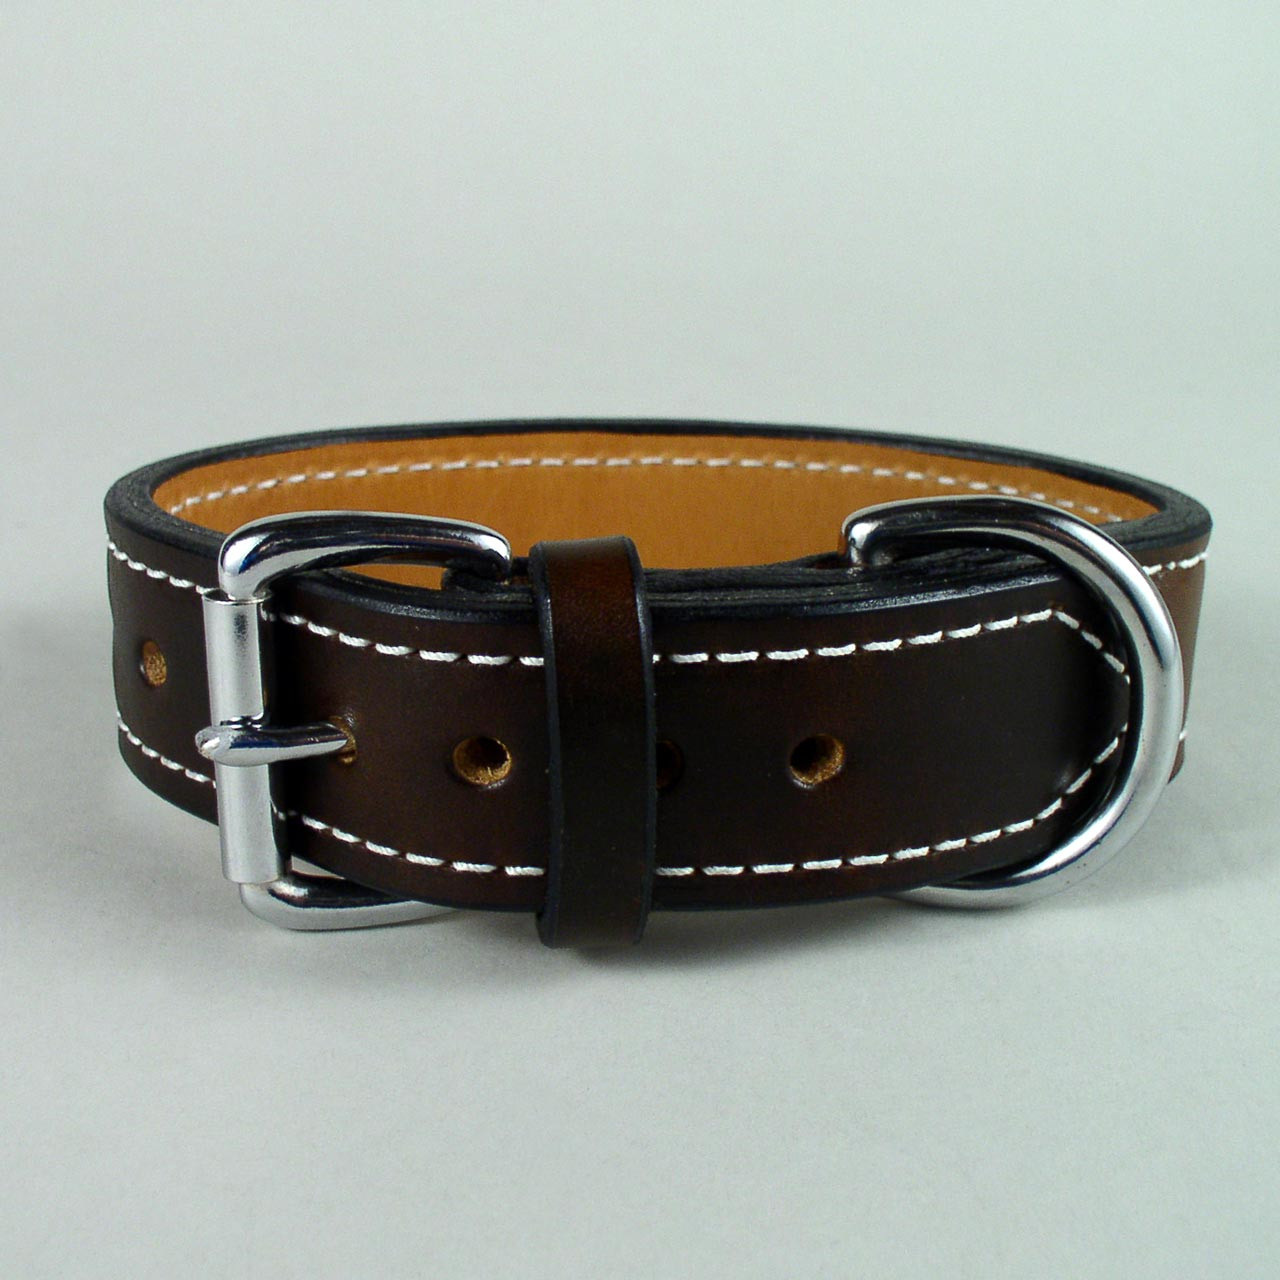 Black Dog Collar with Brown Leather + Black and Ivory Stitching